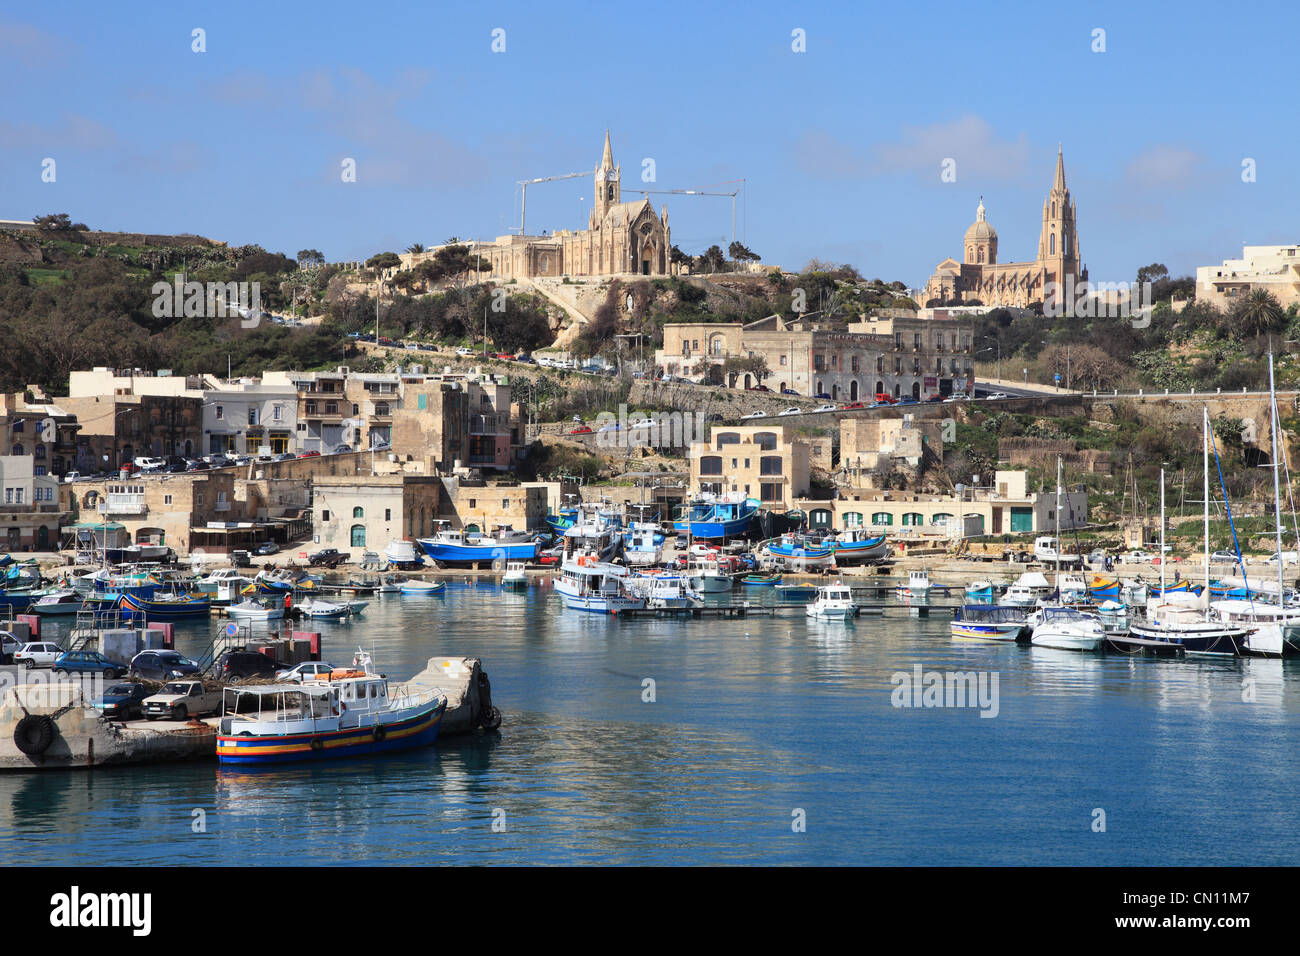 The port of Mgarr on the Mediterranean island of Gozo near Malta Europe seen from an approaching ferry. Stock Photo